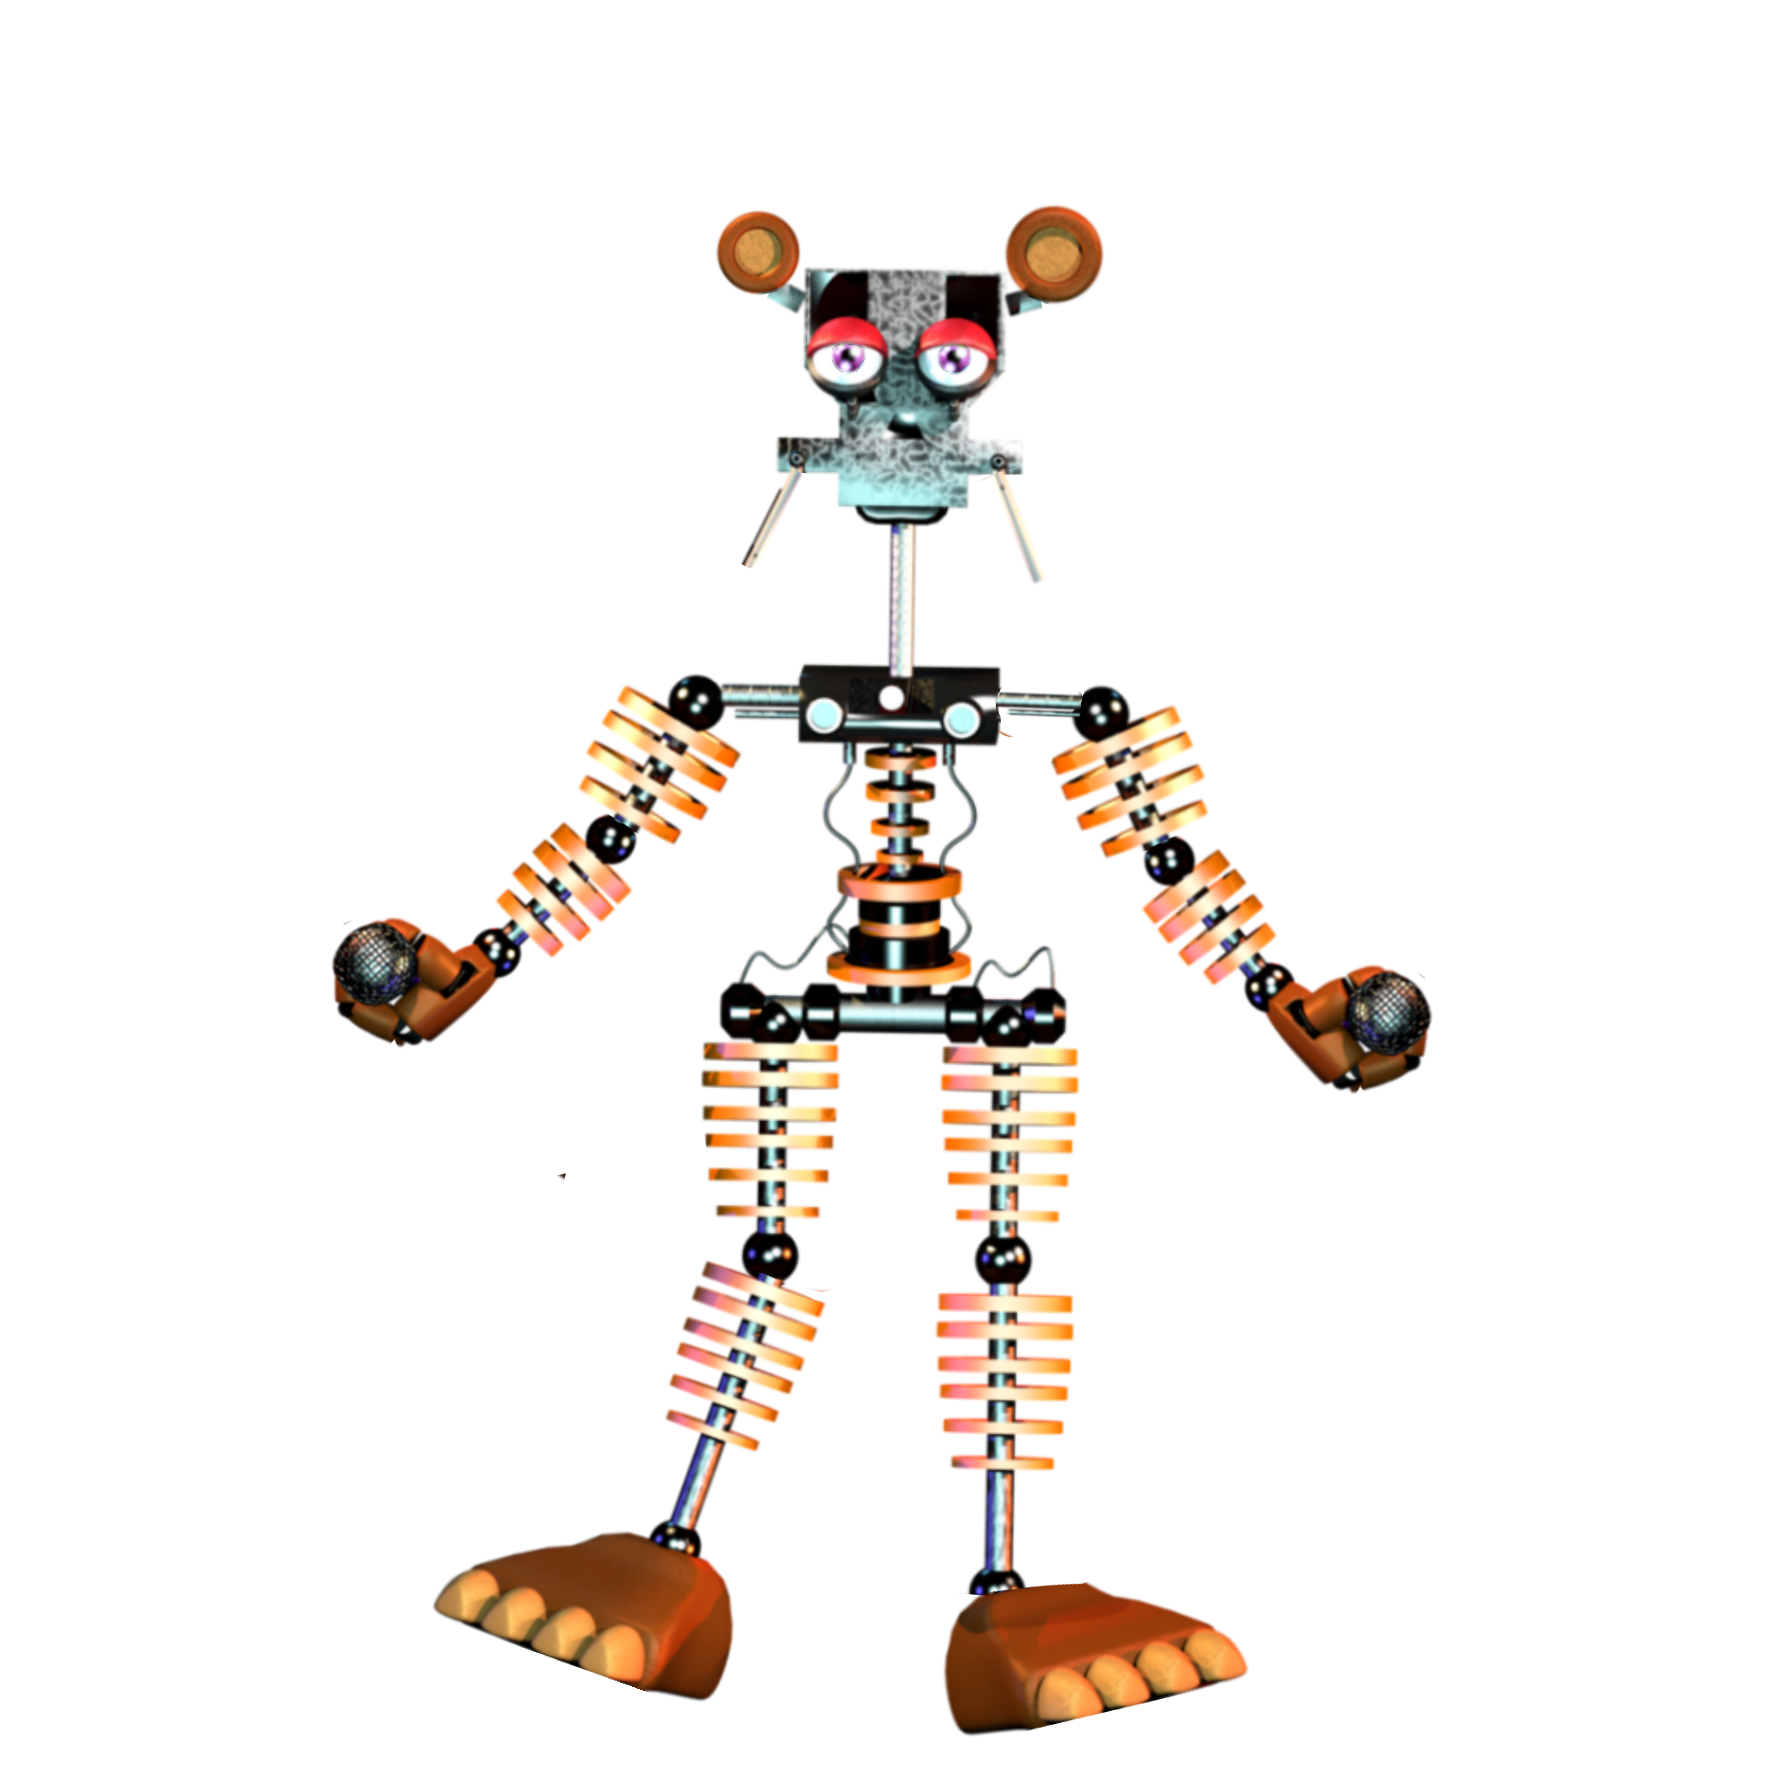 This visual is about rockstar freetoedit #rockstar freddy new endoskeleton.